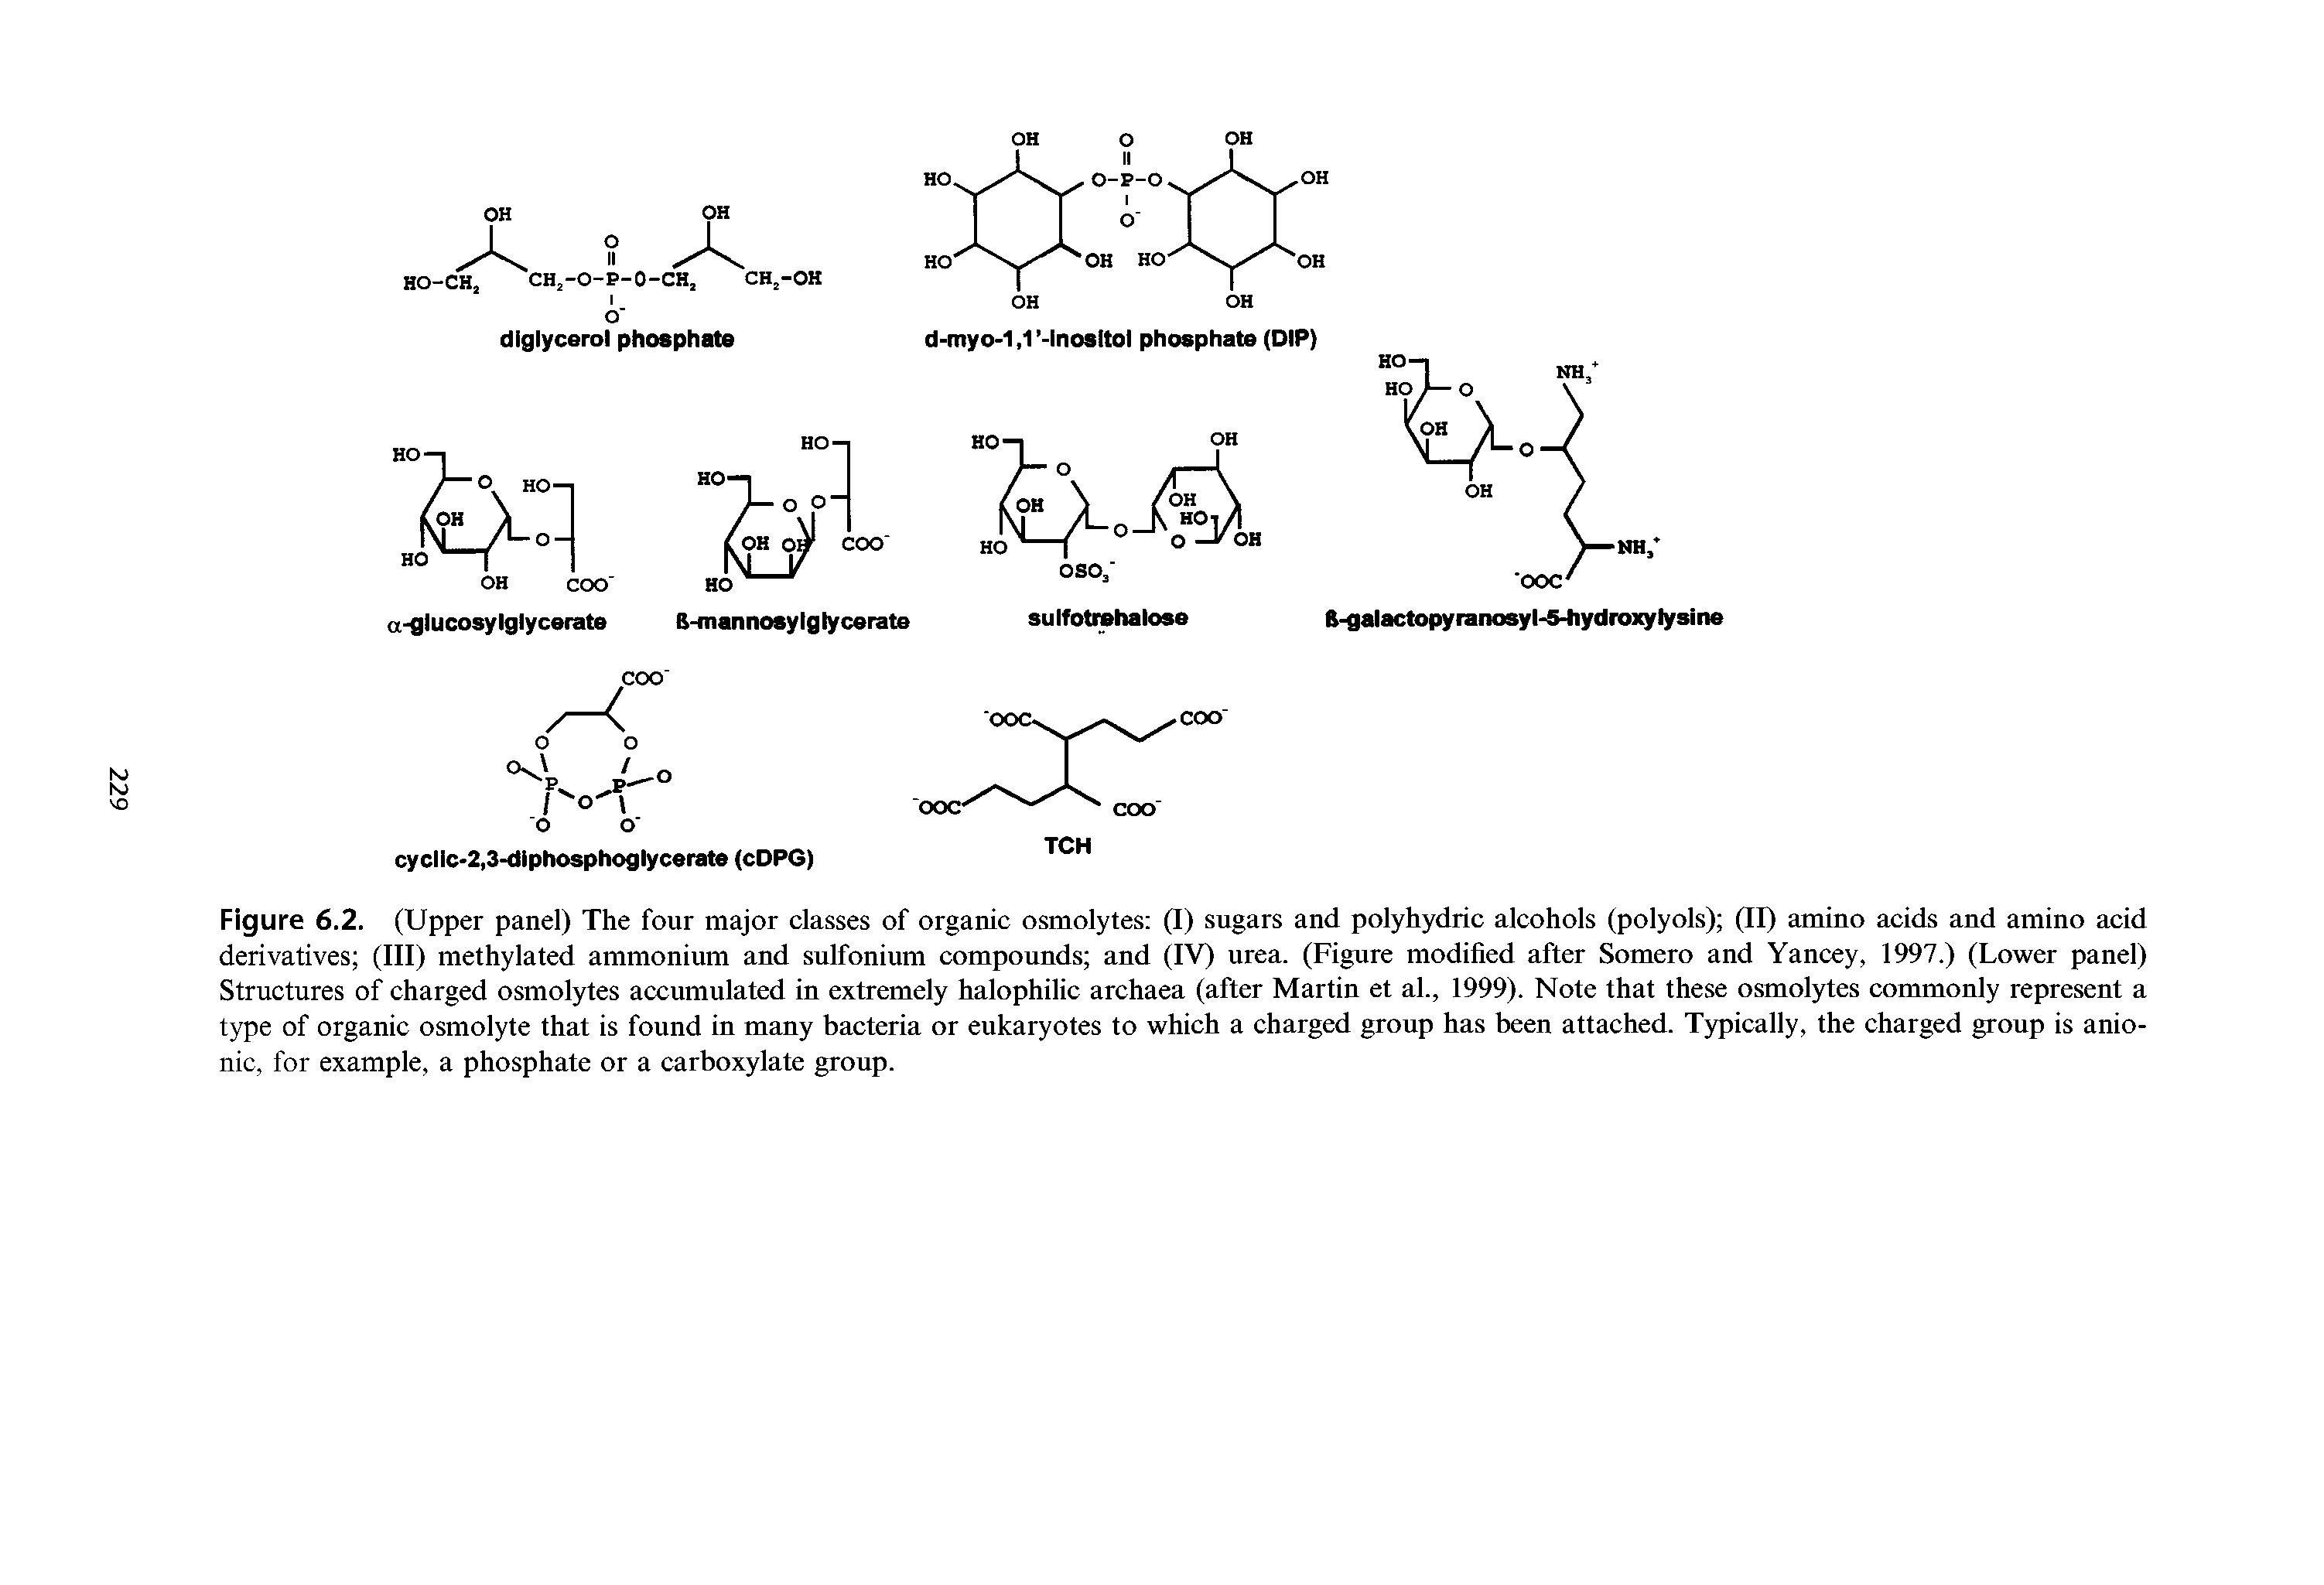 Figure 6.2. (Upper panel) The four major classes of organic osmolytes (I) sugars and polyhydric alcohols (polyols) (II) amino acids and amino acid derivatives (III) methylated ammonium and sulfonium compounds and (IV) urea. (Figure modified after Somero and Yancey, 1997.) (Lower panel) Structures of charged osmolytes accumulated in extremely halophilic archaea (after Martin et al., 1999). Note that these osmolytes commonly represent a type of organic osmolyte that is found in many bacteria or eukaryotes to which a charged group has been attached. Typically, the charged group is anionic, for example, a phosphate or a carboxylate group.